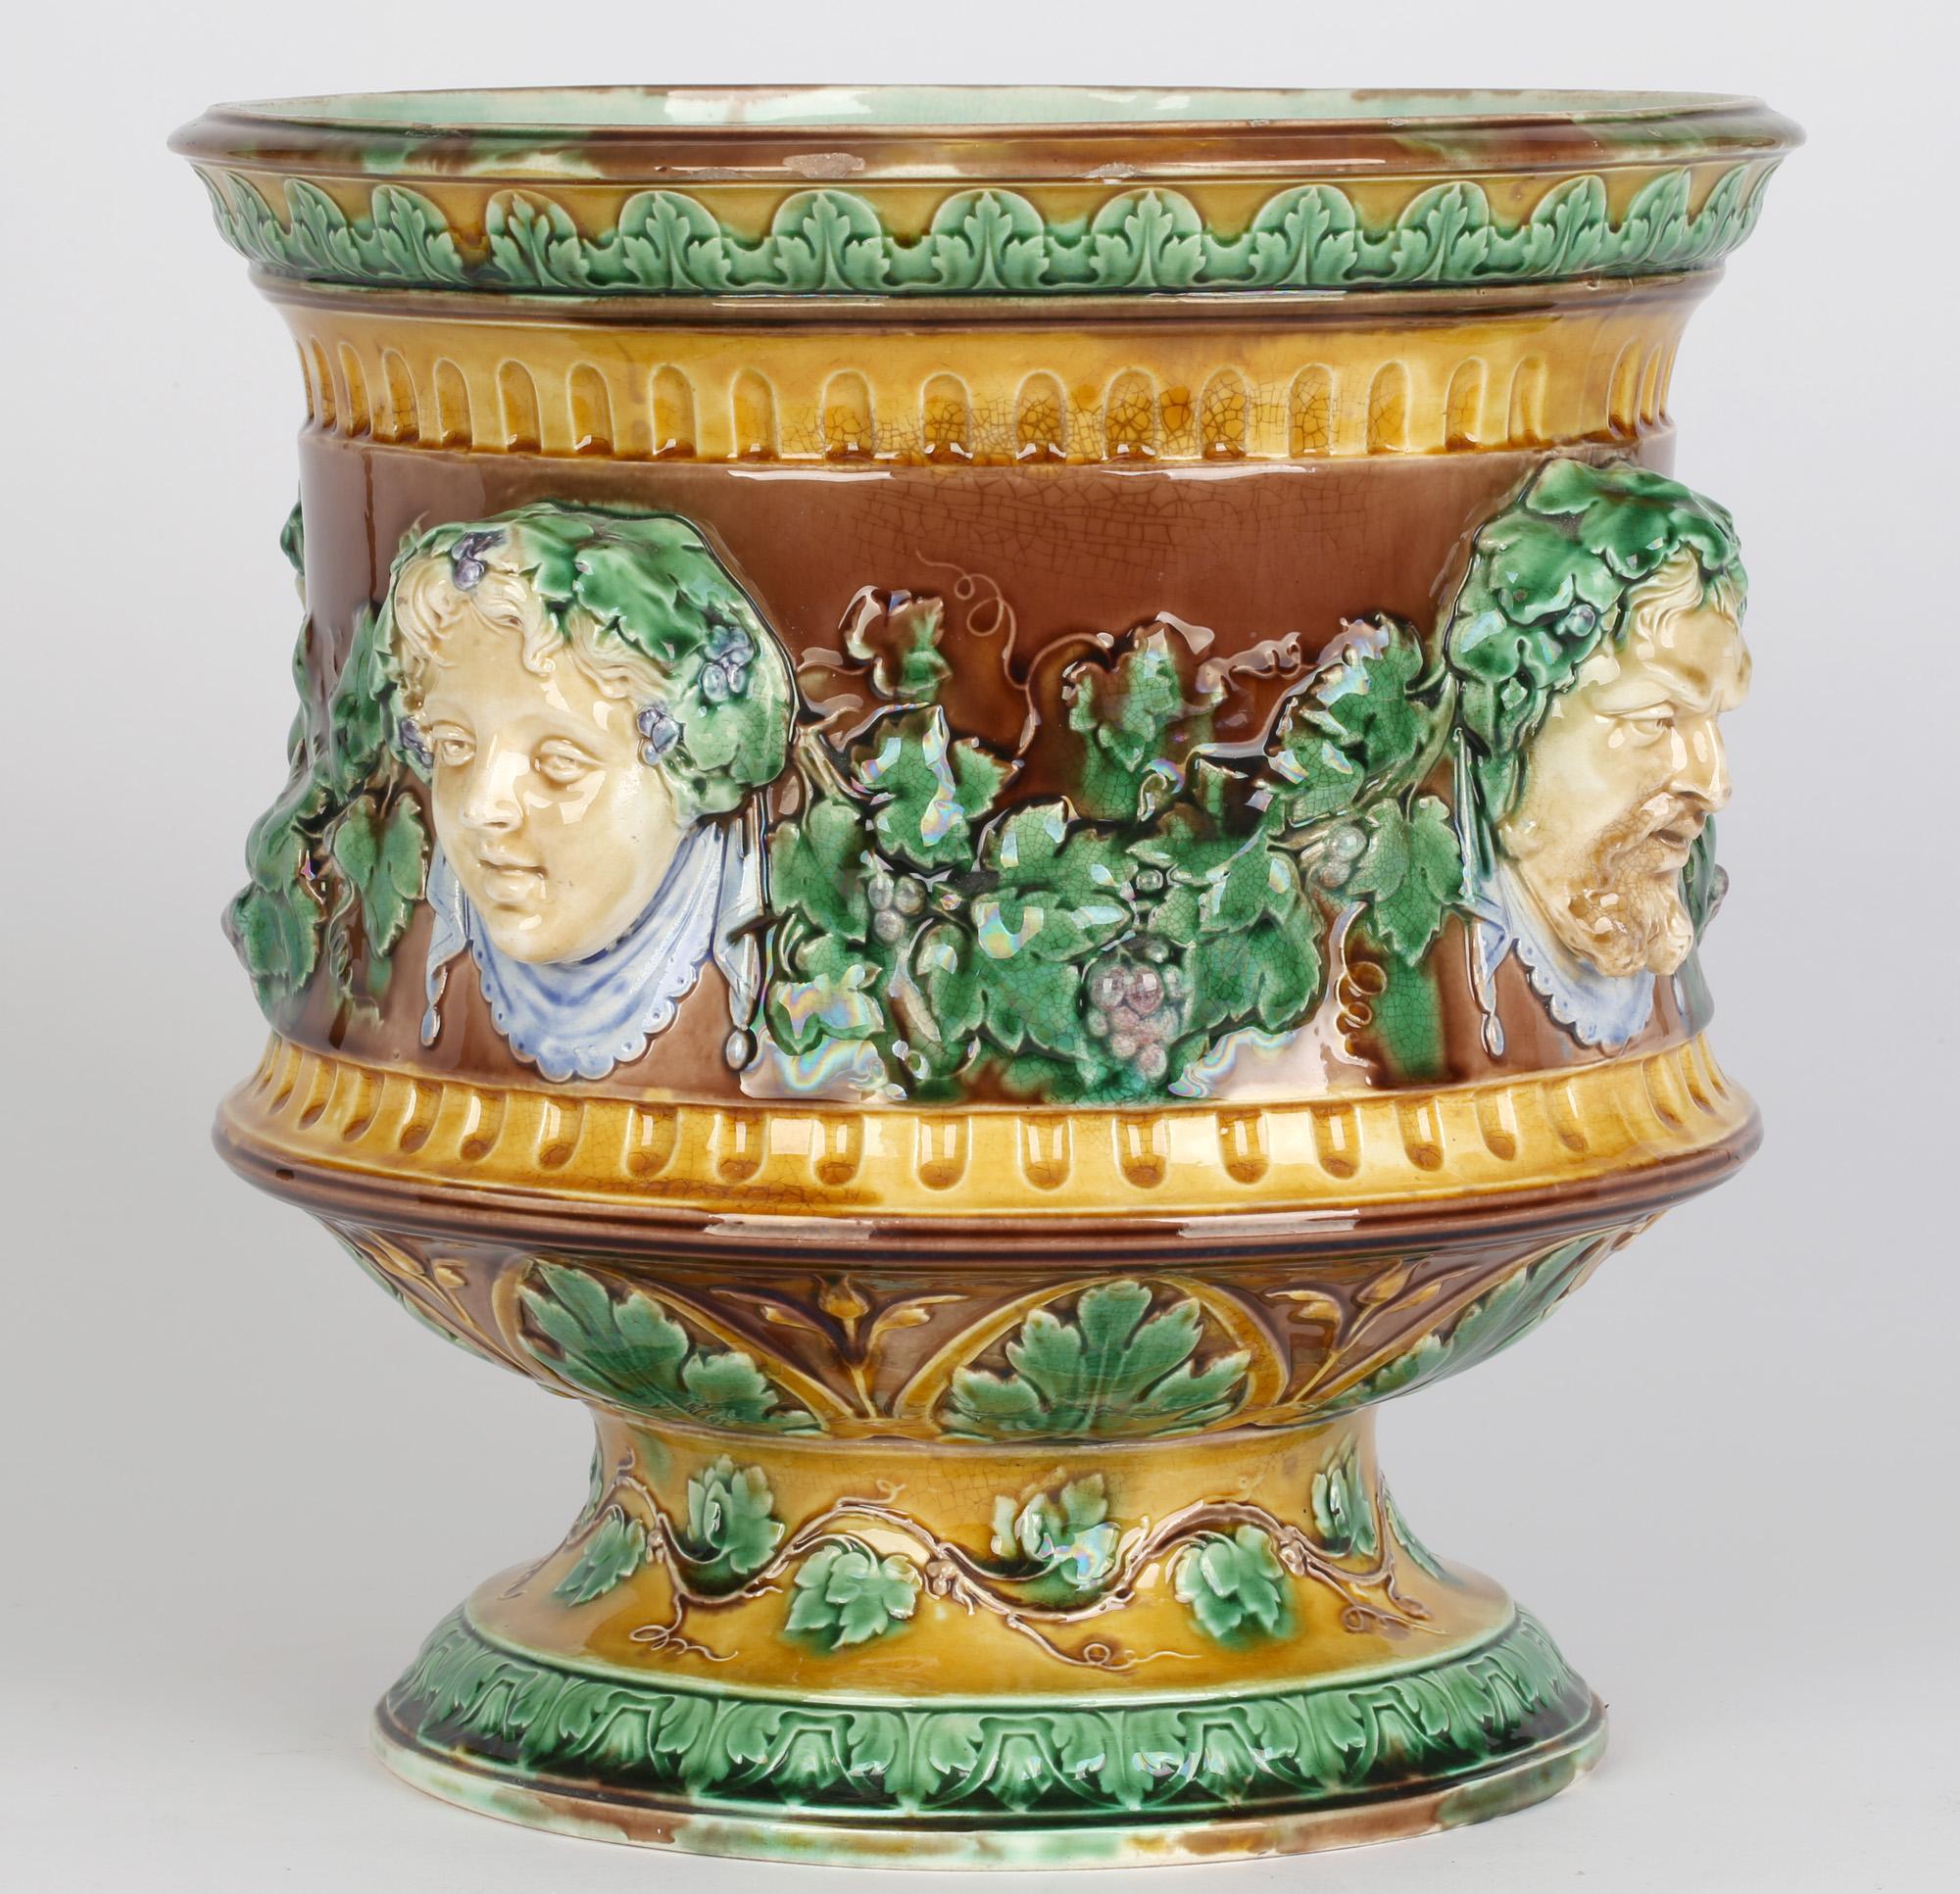 Wedgwood Large and Impressive Majolica Jardiniere with Masks and Trailing Vines In Good Condition For Sale In Bishop's Stortford, Hertfordshire